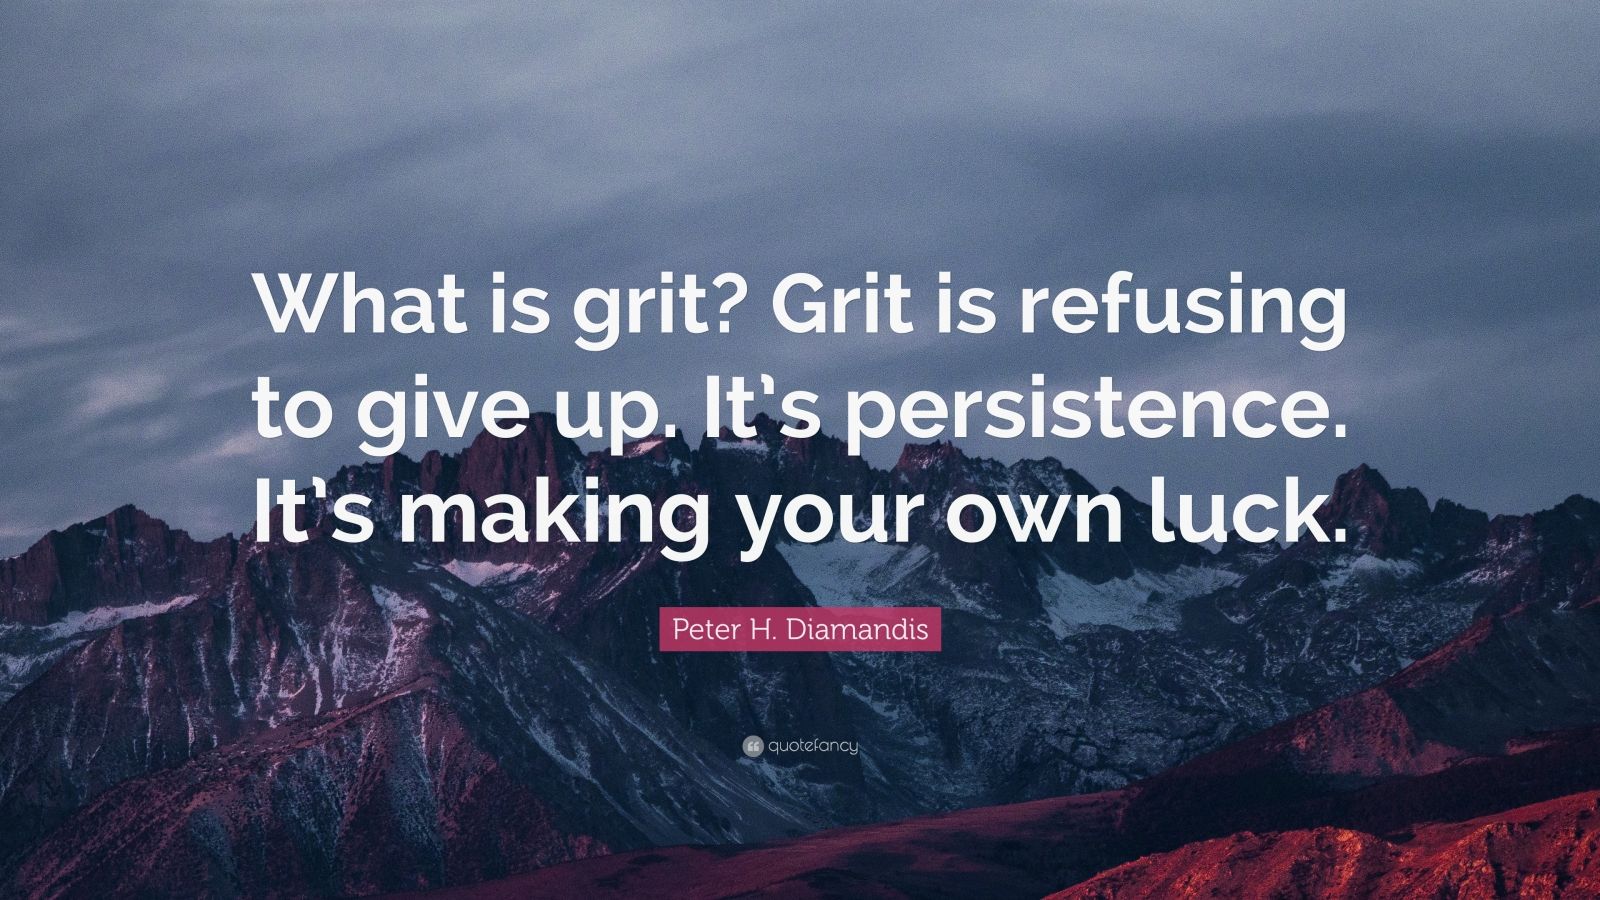 Peter H. Diamandis Quote: “What is grit? Grit is refusing to give up